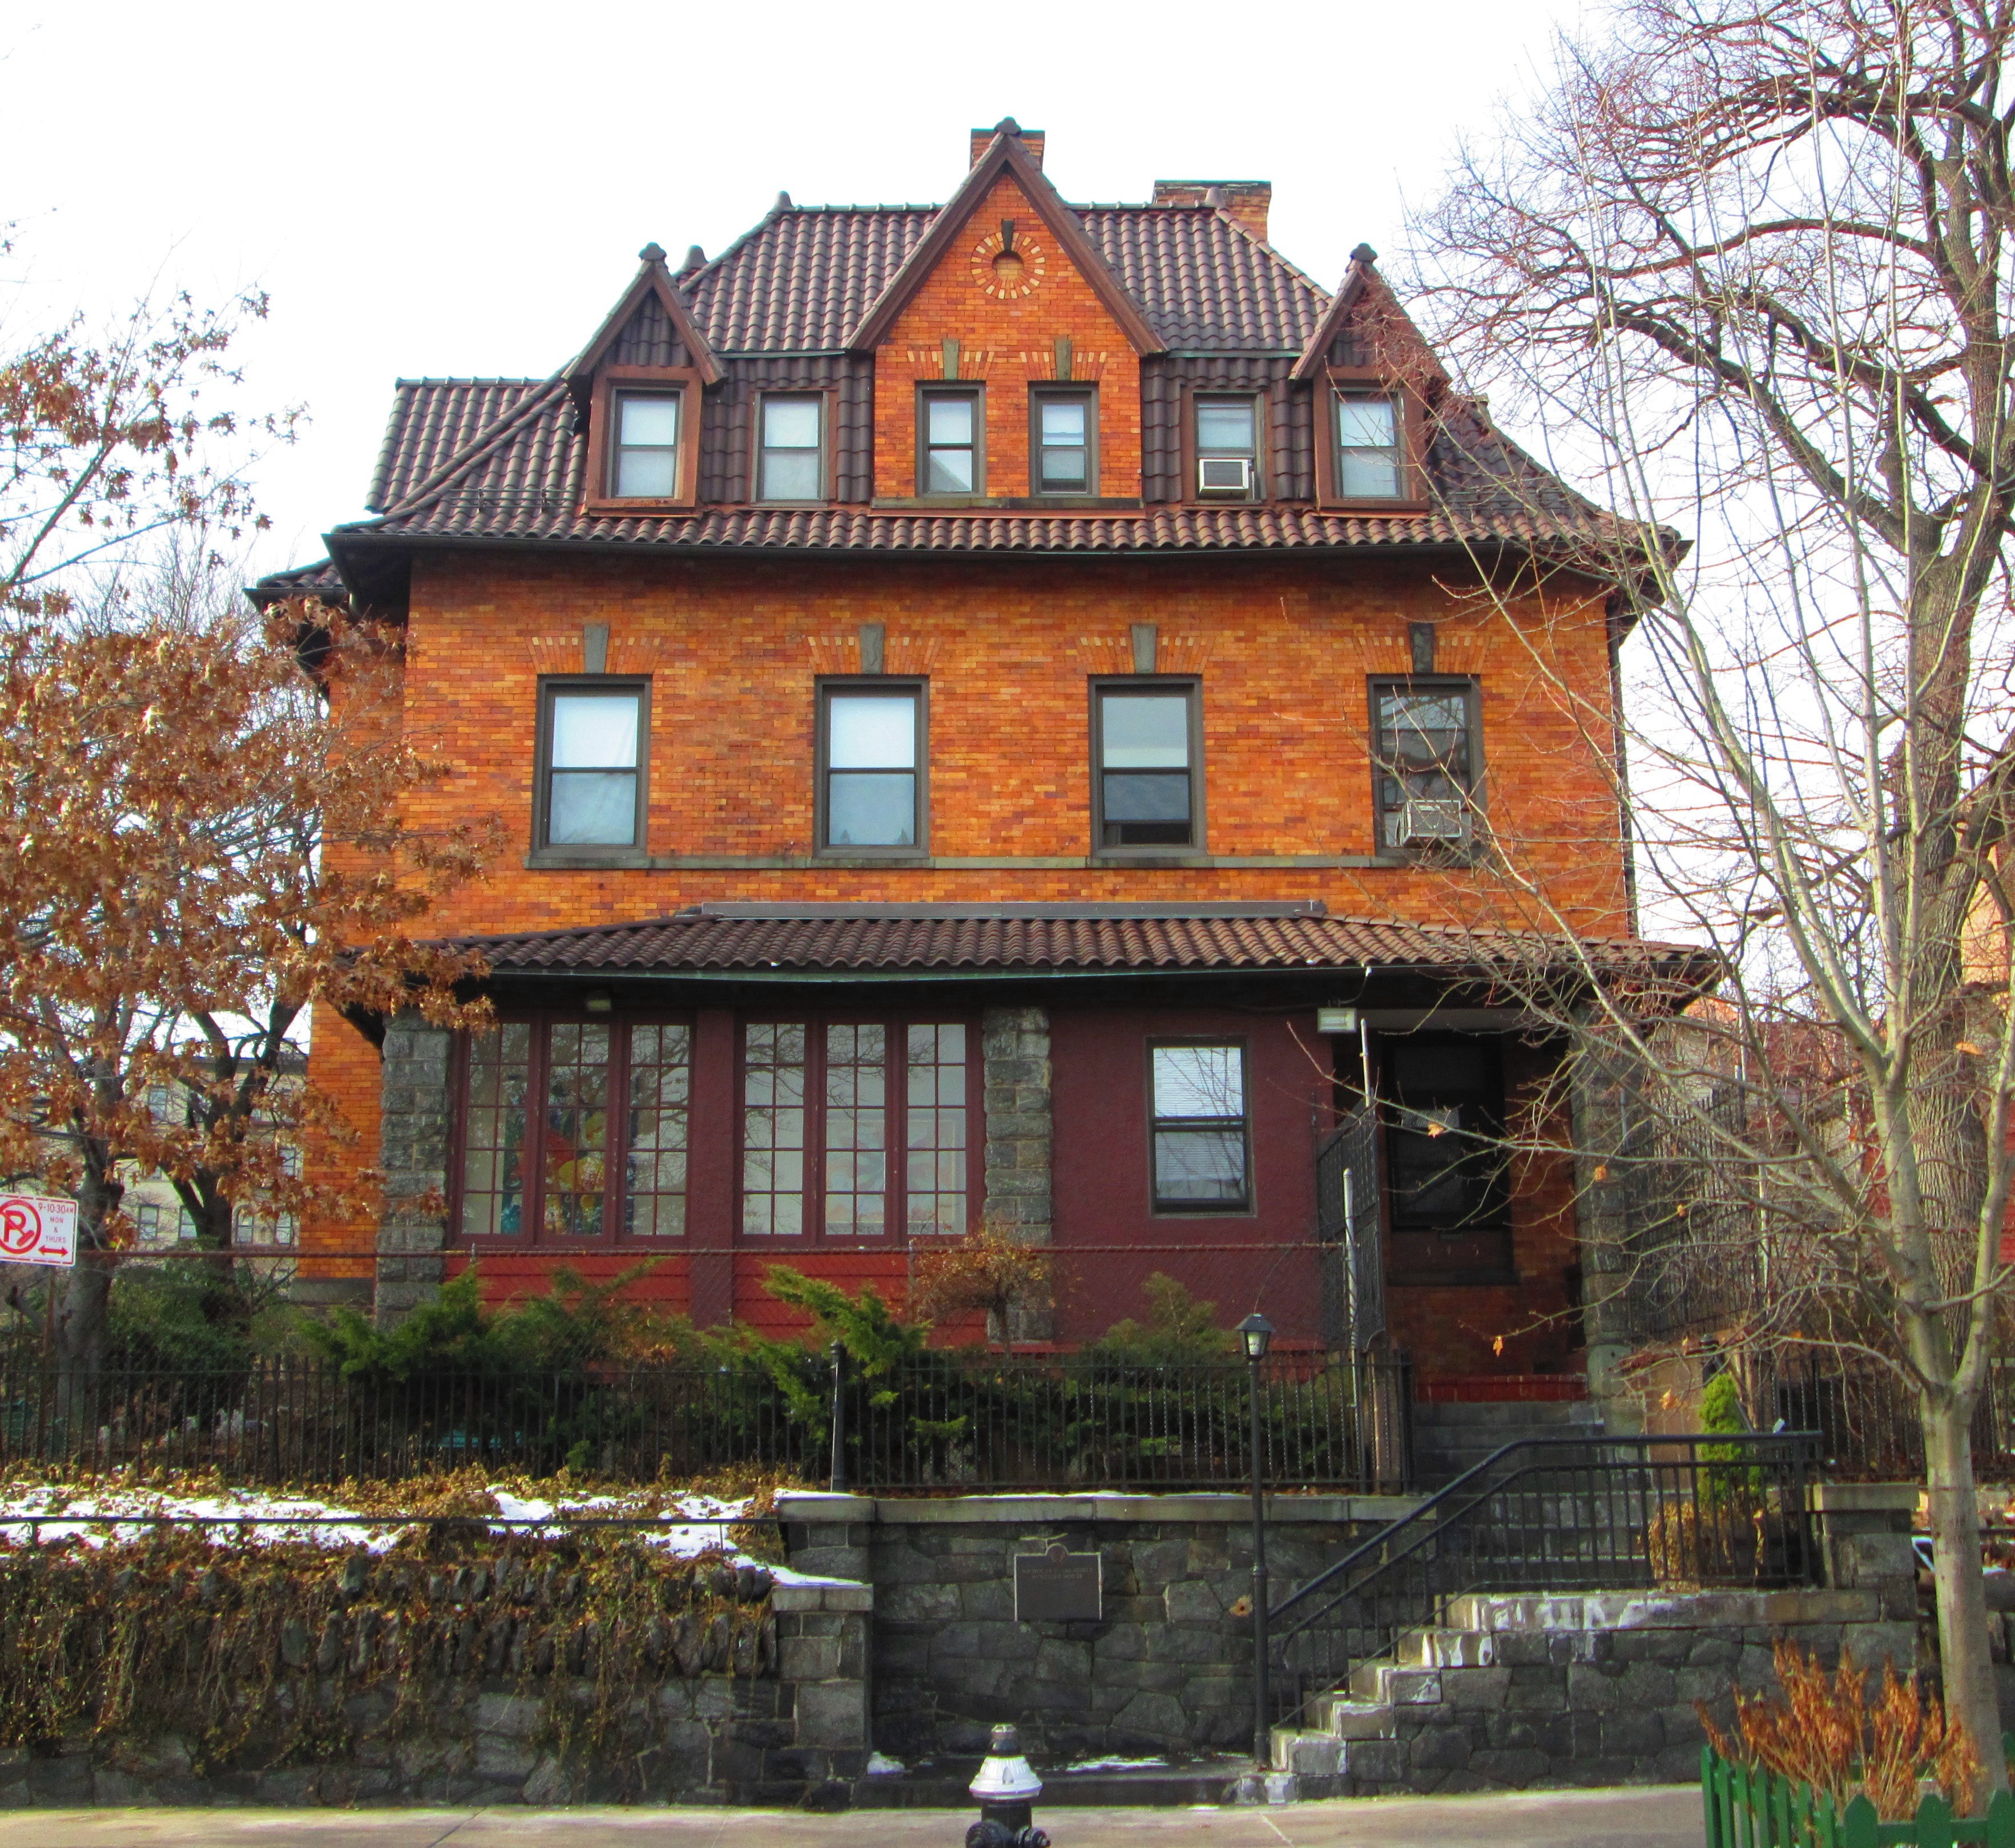 File:Benziger House 345 Edgecombe Avenue from east.jpg - Wikimedia Commons